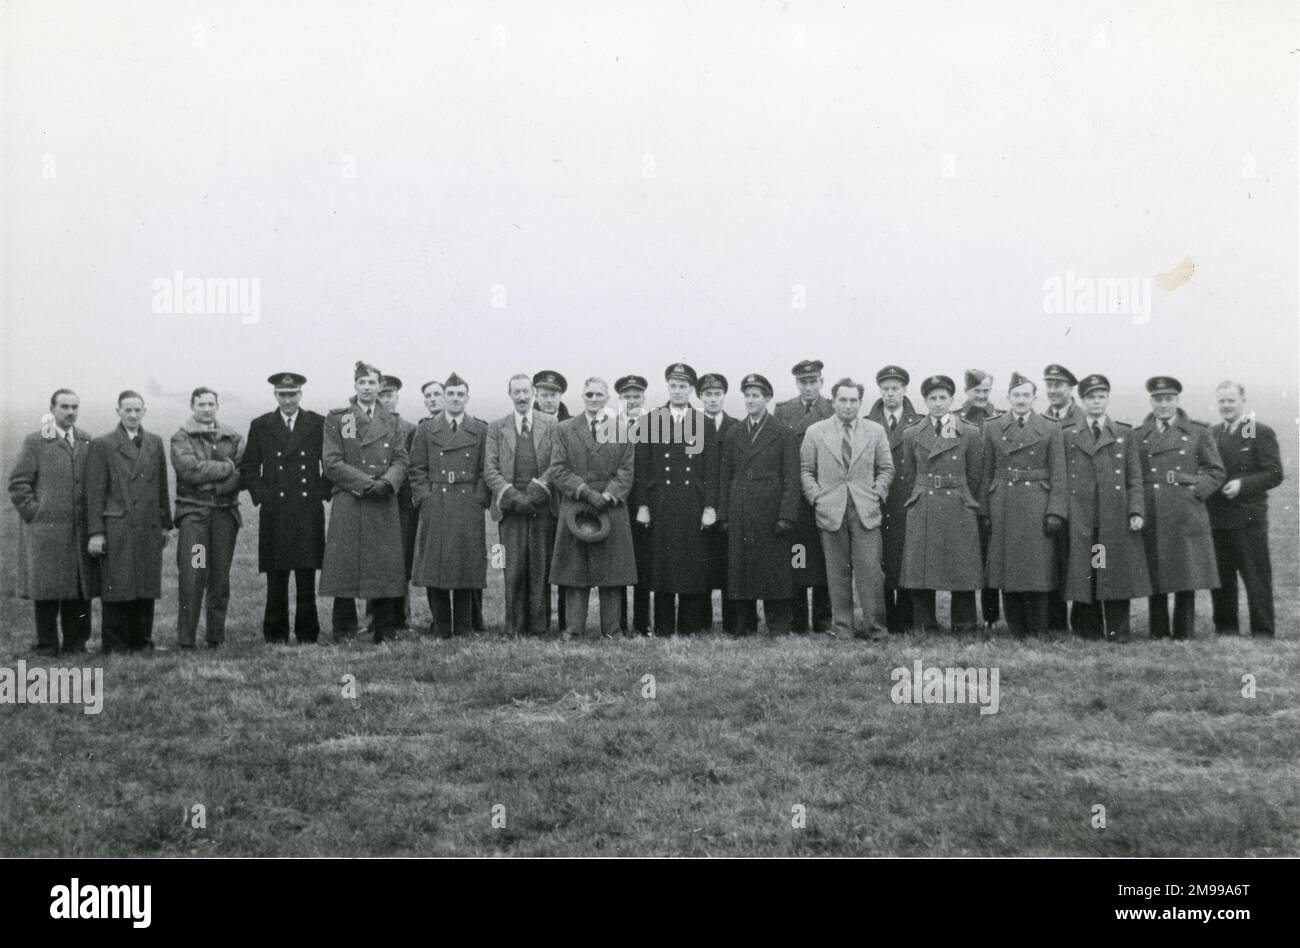 A section of the students and staff of the Empire Test Pilots? School during a visit to Rotol Ltd, Gloucester. Grp Capt S.R. Ubee, Commandant of the School, 11th from left; Lt Cdr W.F. Krantz, US Navy, 10th from left; and Flt Lt W.H. Scott, RAAF, 11 from right. Stock Photo